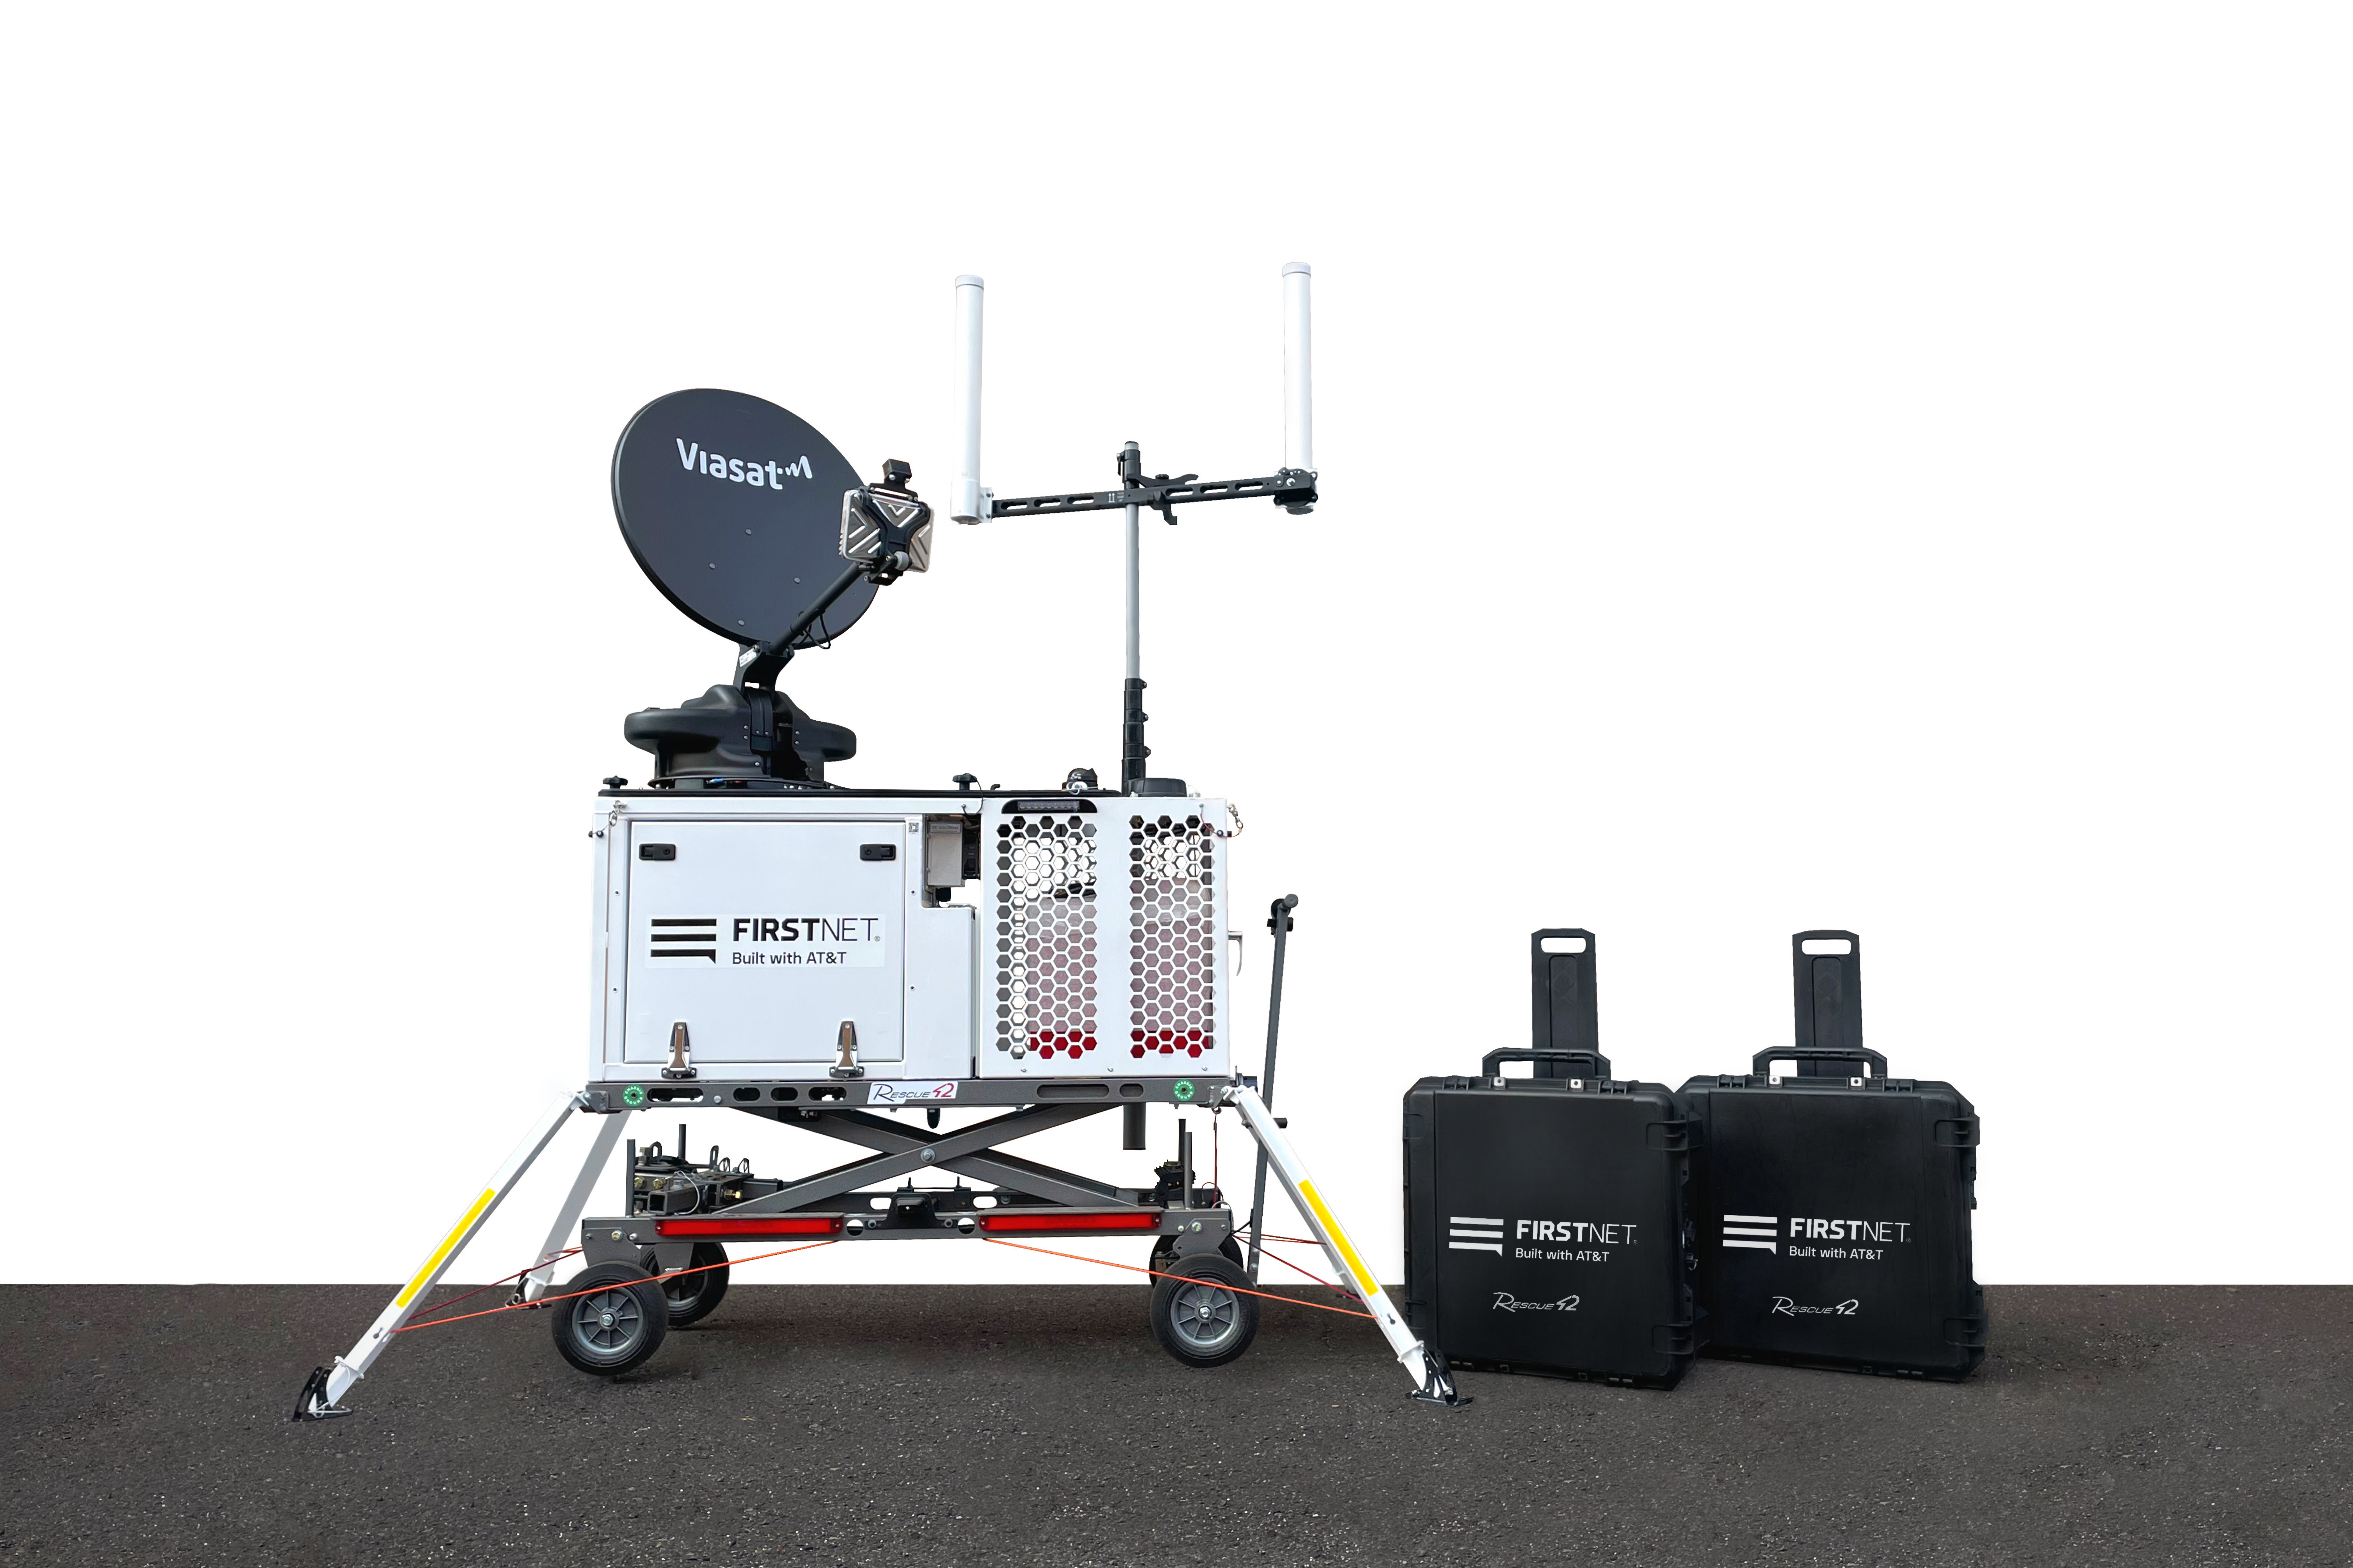 Side-by-side comparison of the Compact Rapid Deployable for FirstNet and new miniCRD